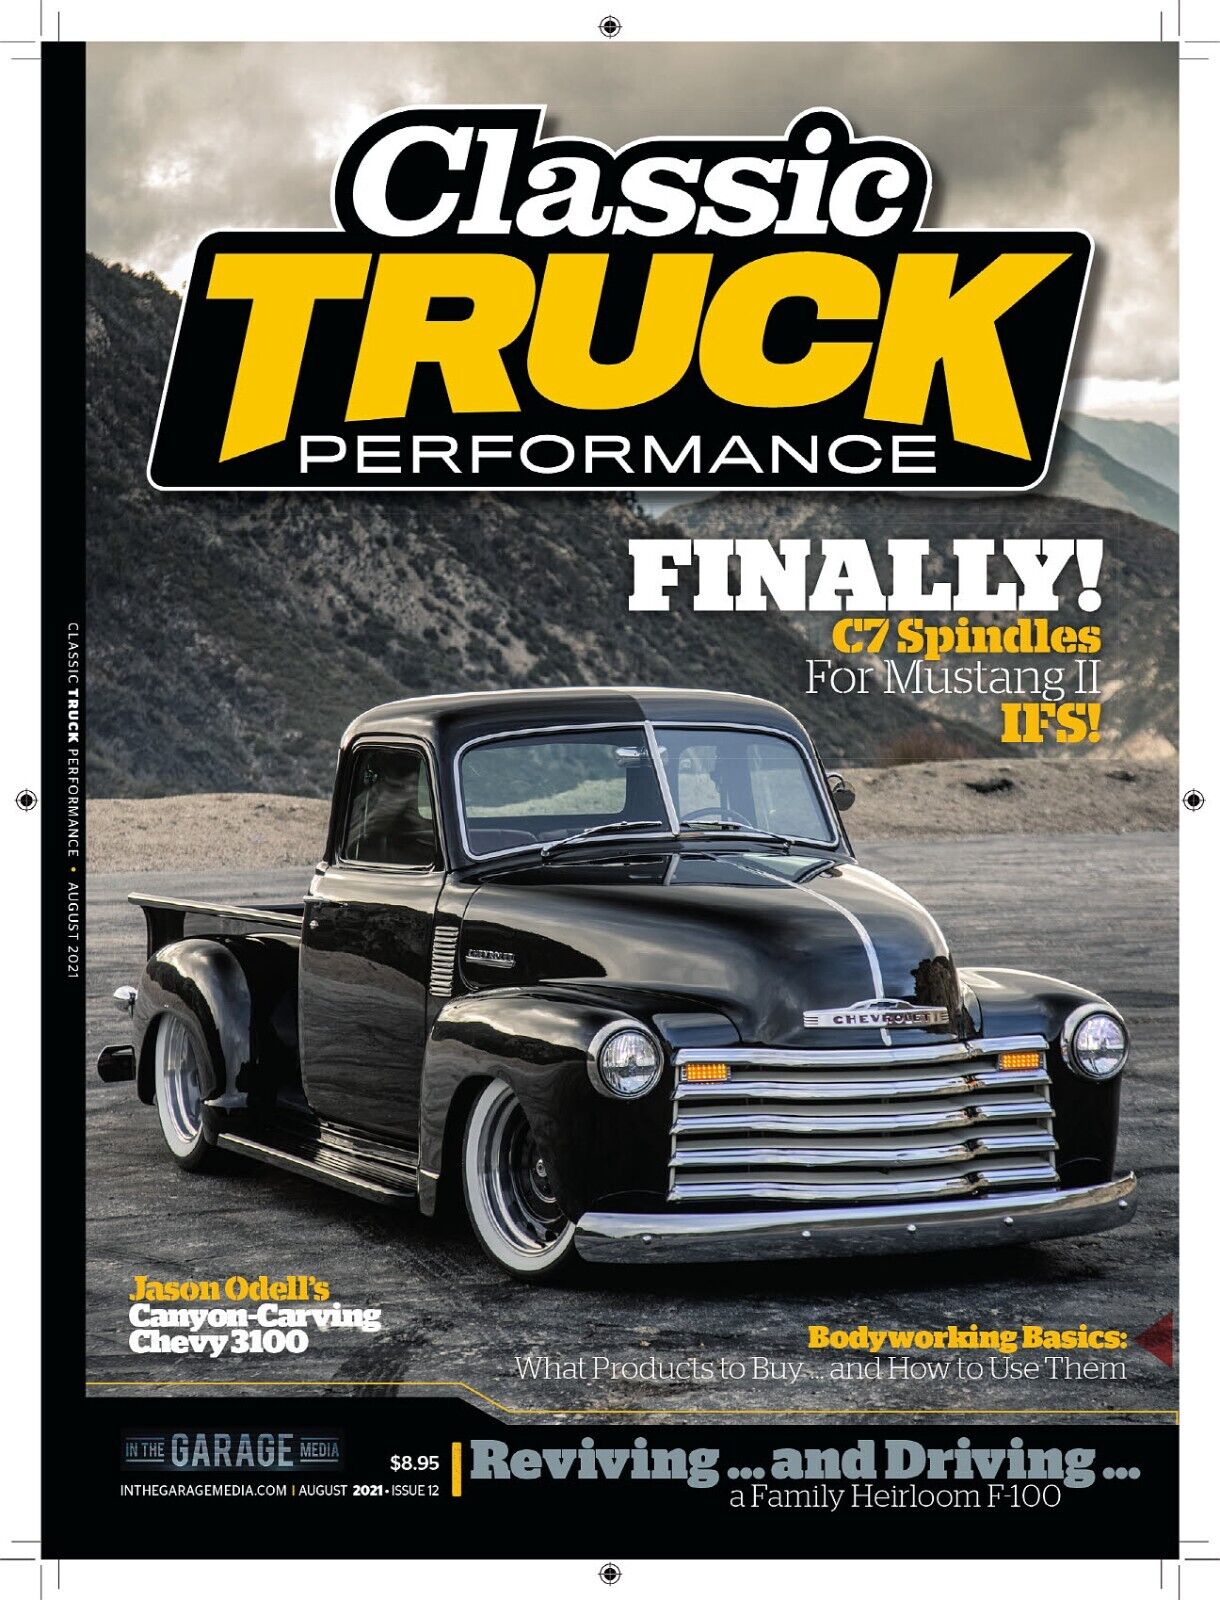 Classic Truck Performance Magazine Issue #12 August 2021 - New